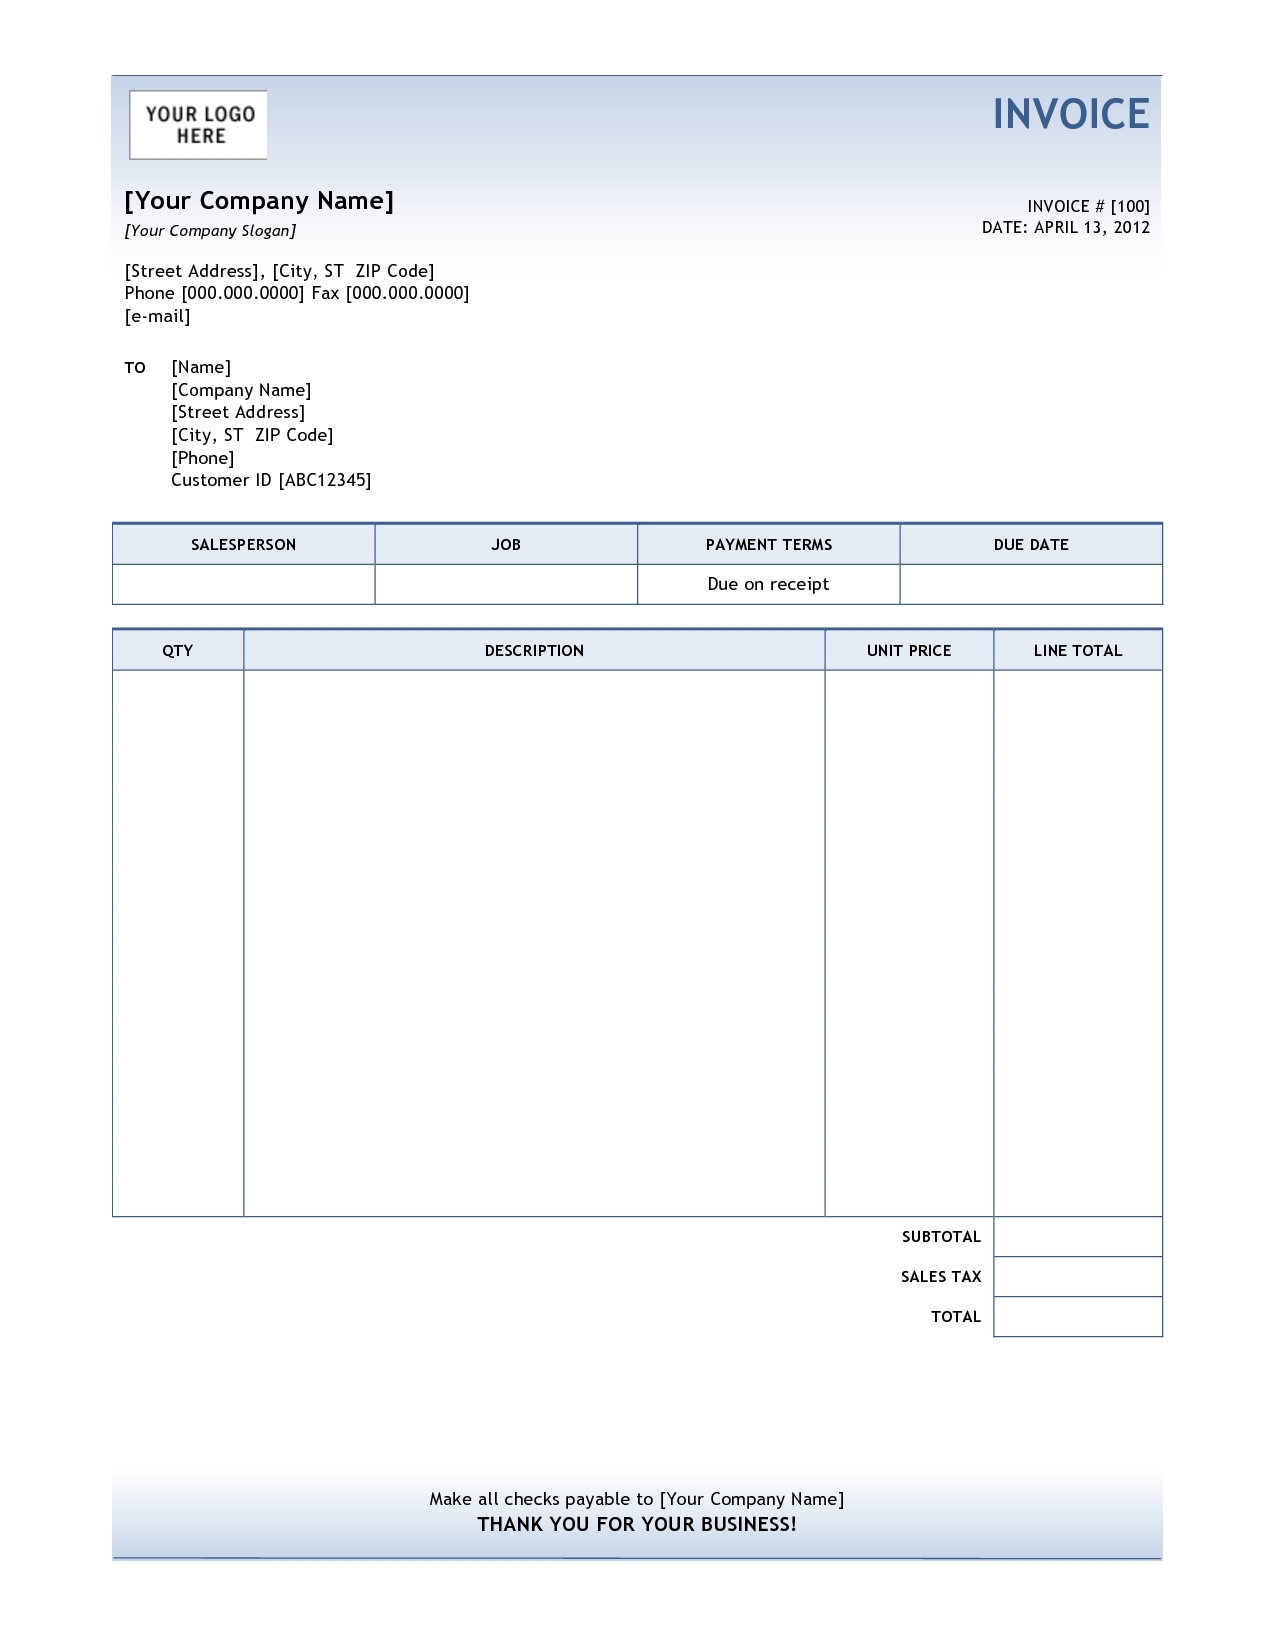 sales invoice format in word residers sale invoice format in word